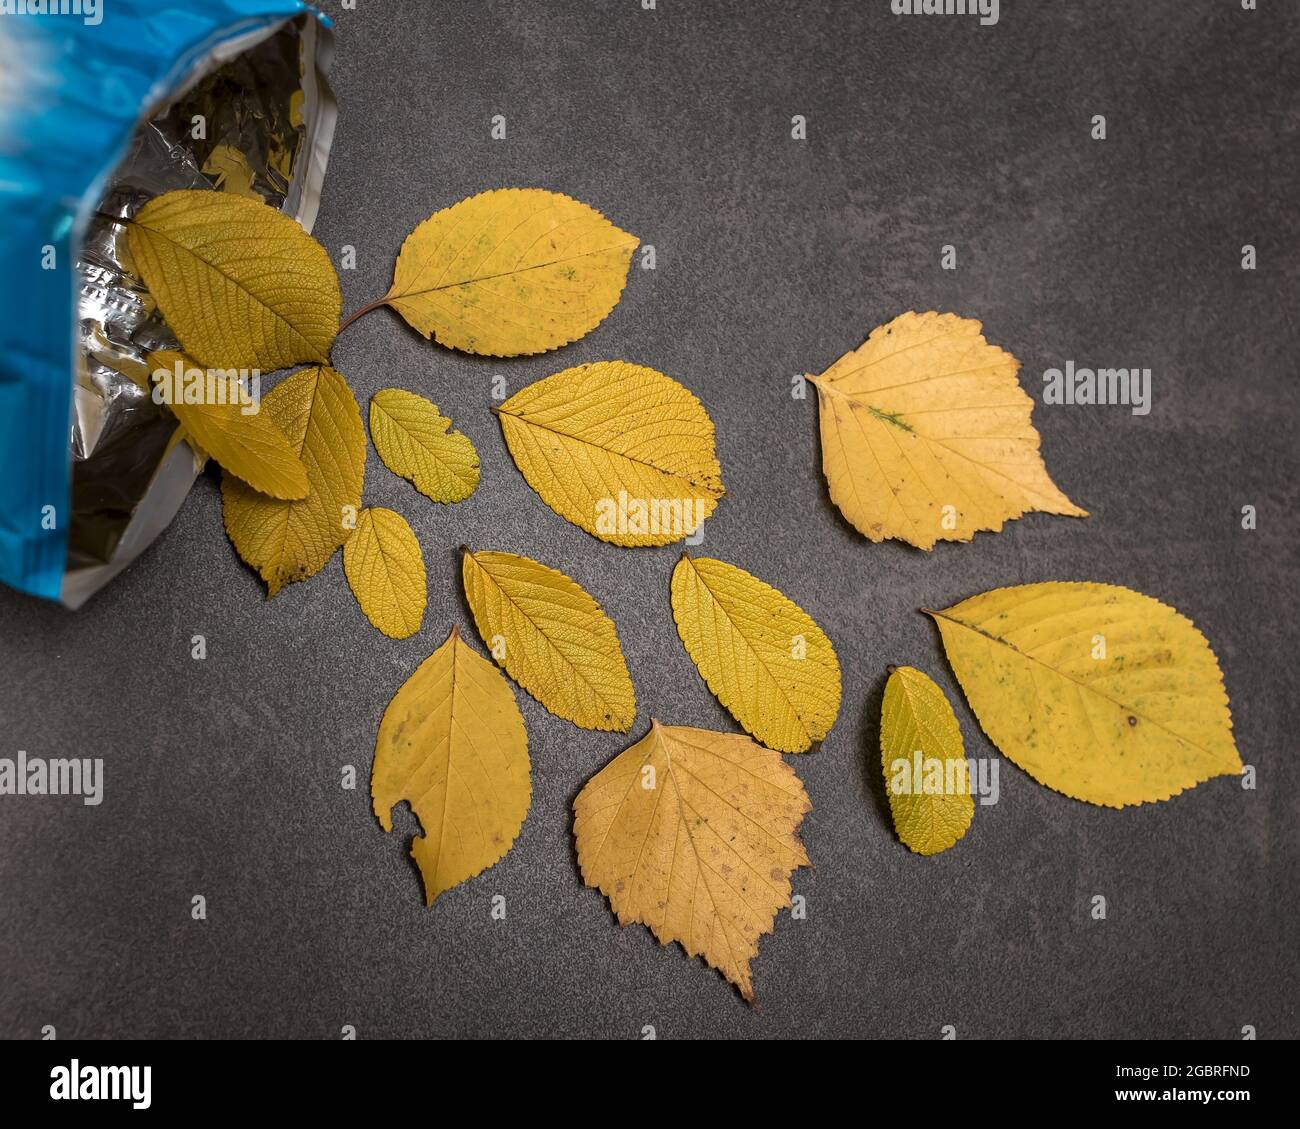 Yellow autumn leaves are scattered from an open package like potato chips on a black stone table. Original idea.  Stock Photo